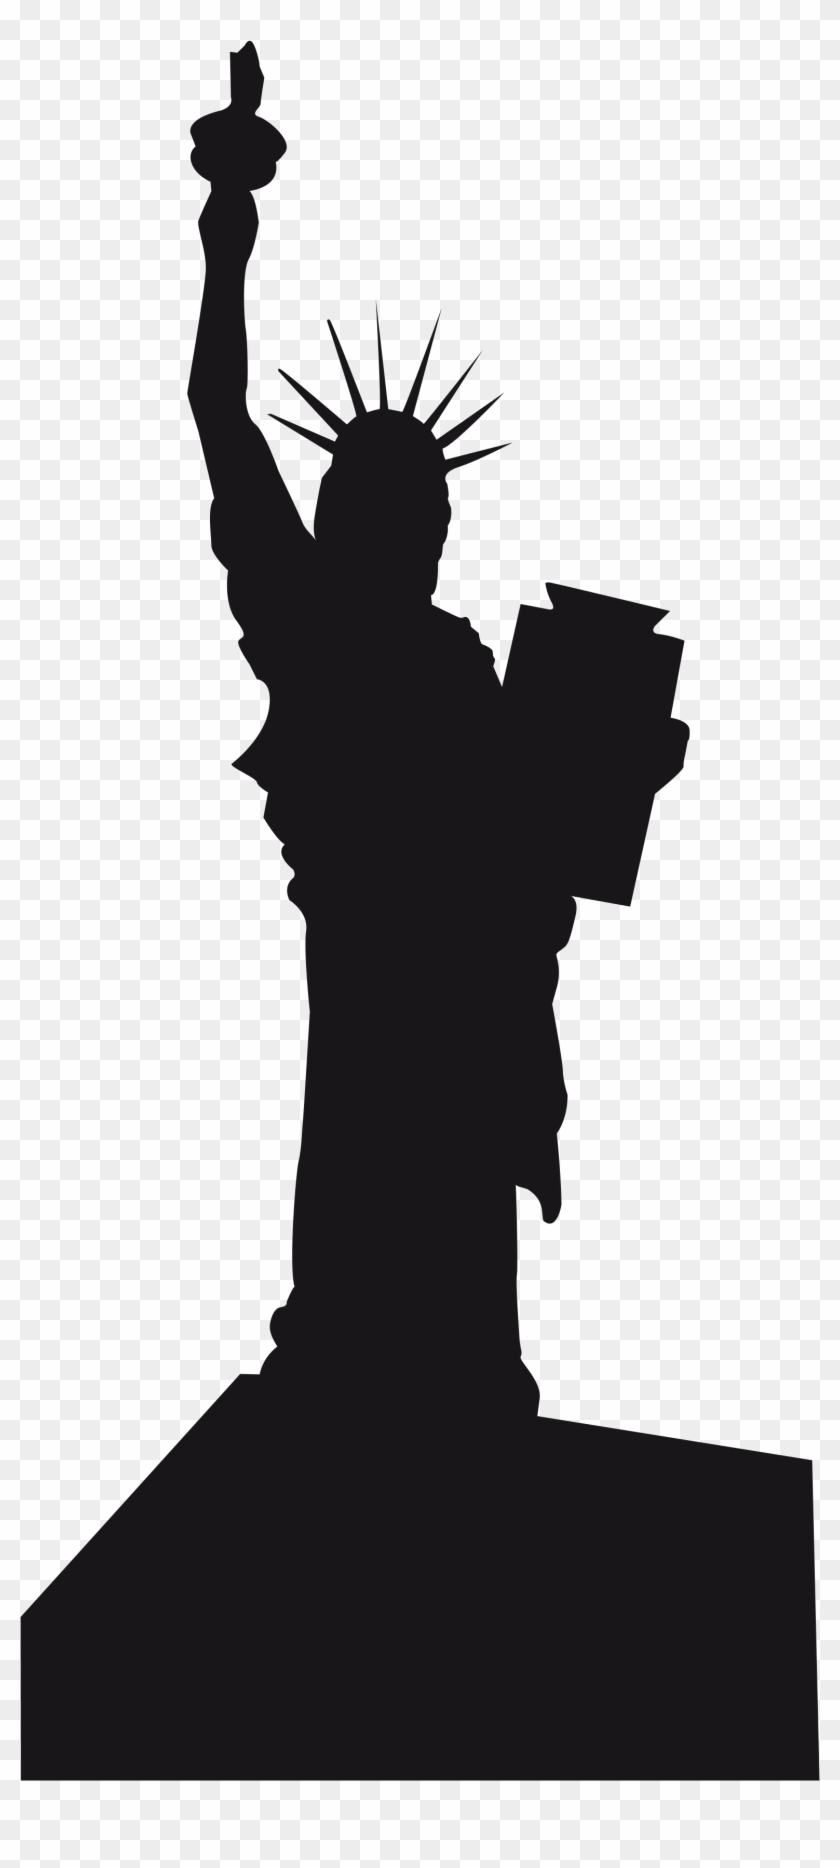 Open - Silhouette Of Statue Of Liberty #812062